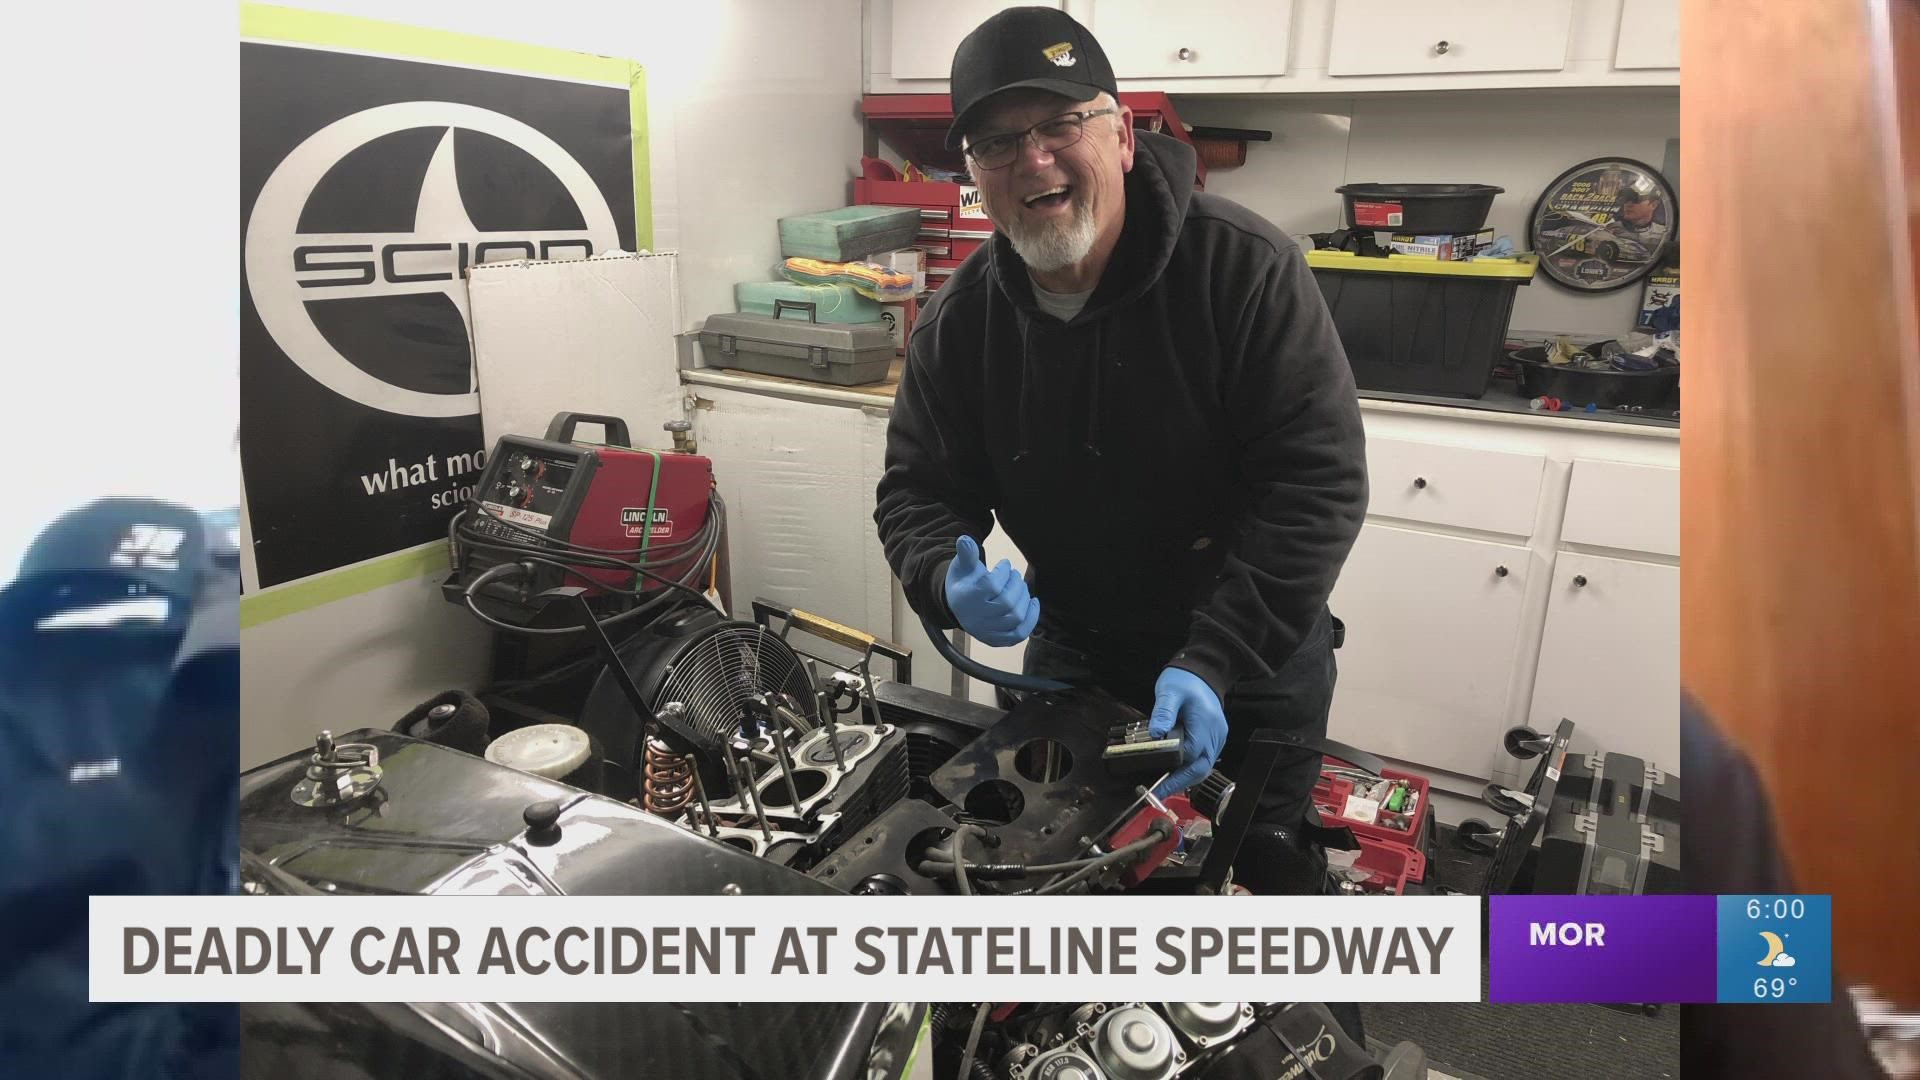 According to Stateline Speedway's Facebook page, Eldredge died Sunday after a crash that occurred at the track on Saturday.